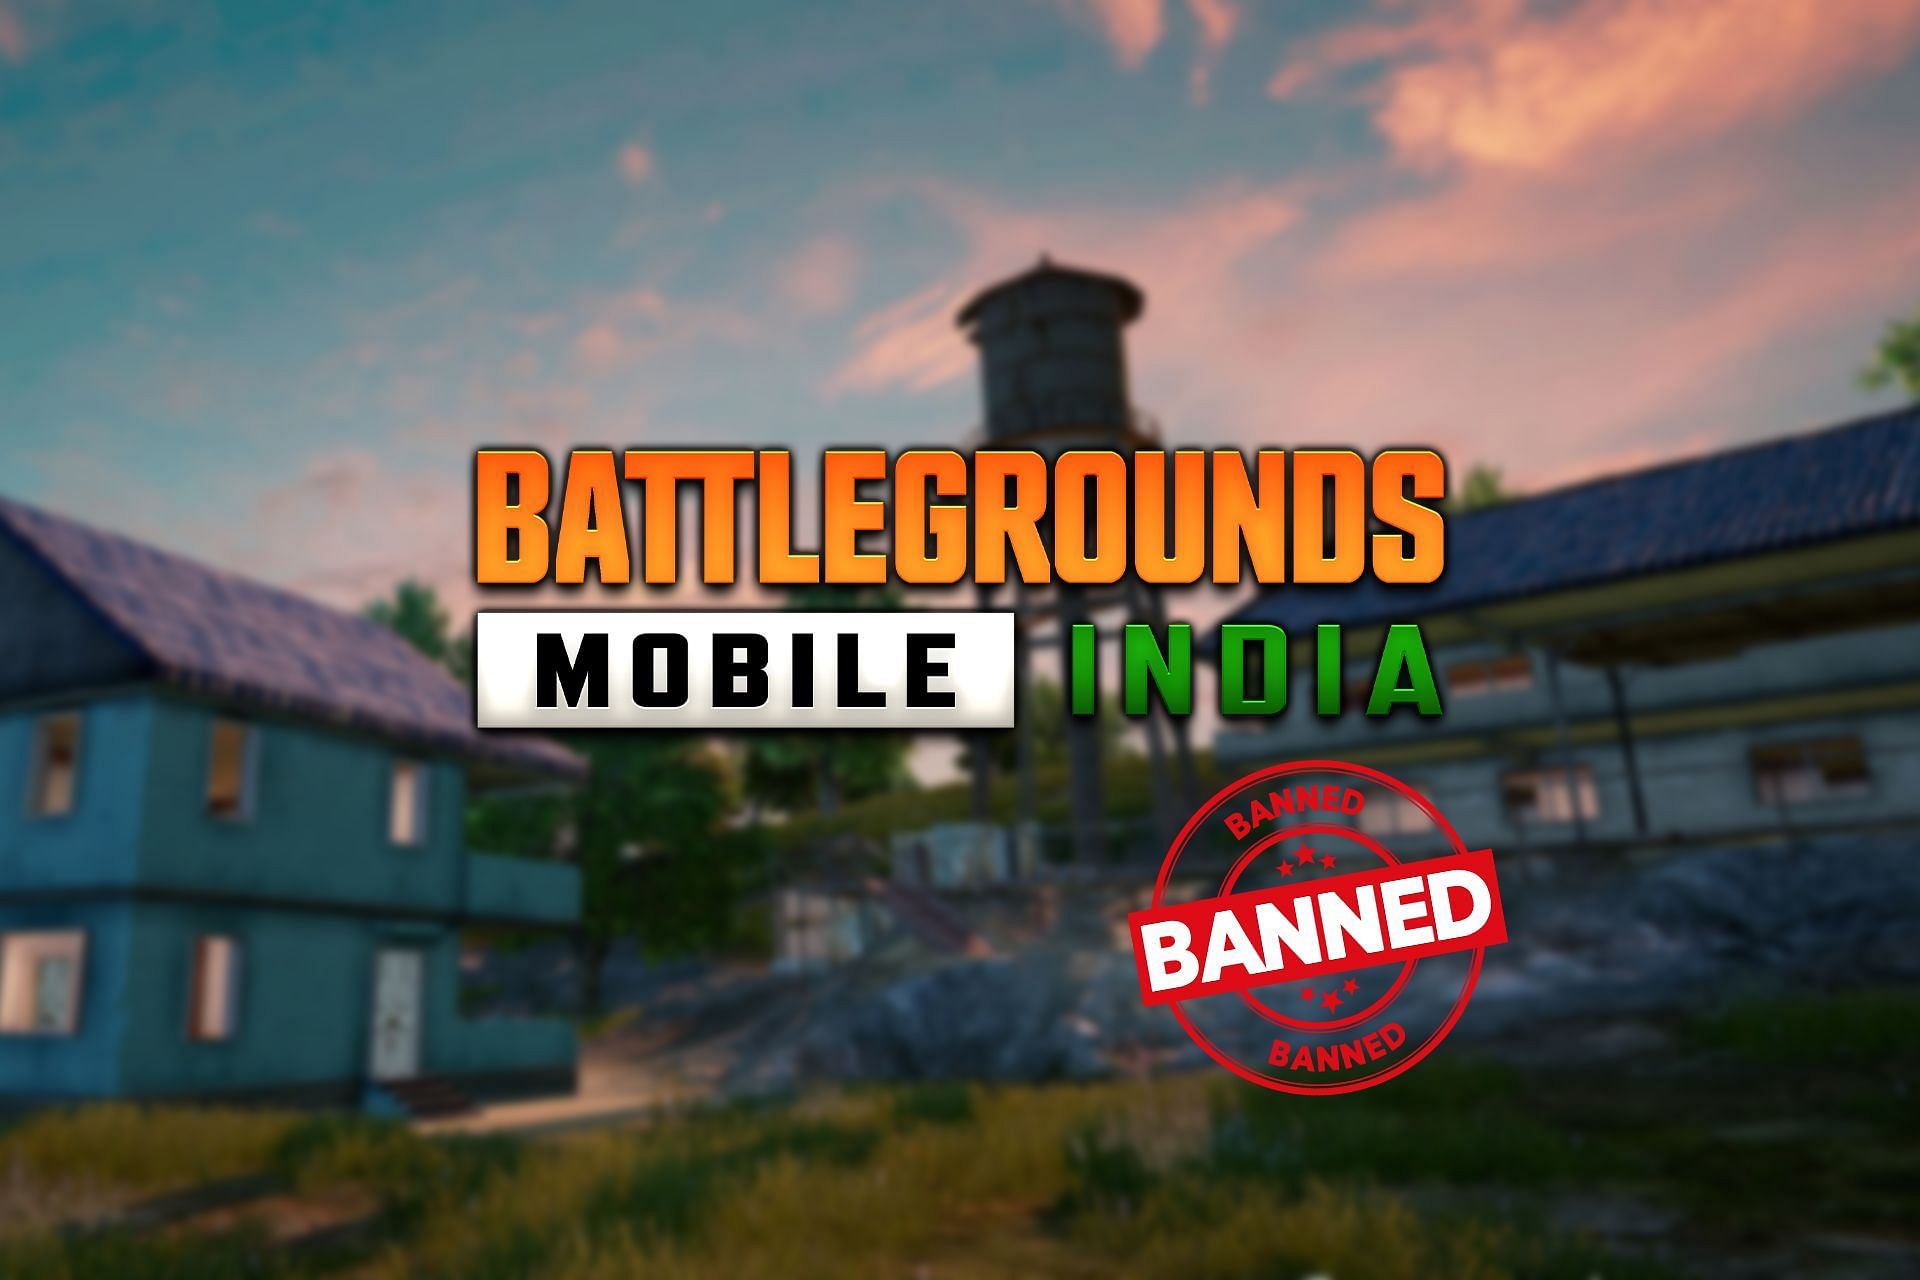 The game was banned by the Indian government in July (Image via Sportskeeda)